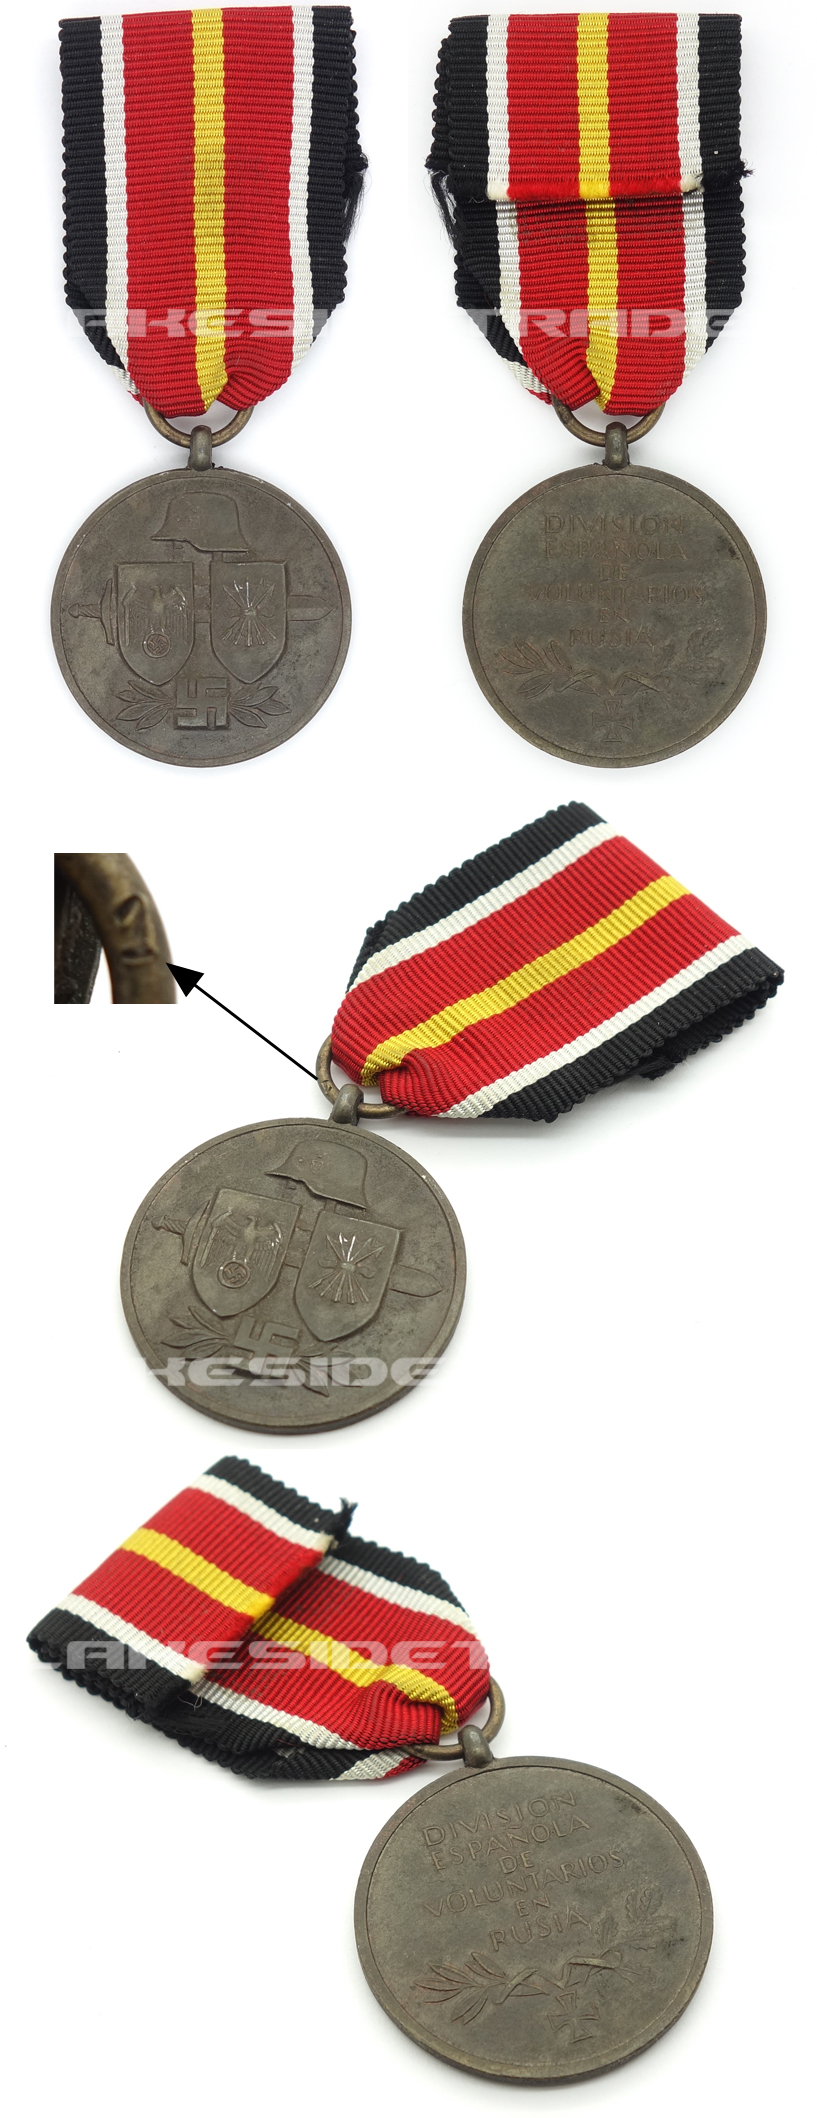 Spanish “Blue Division” Commemorative Medal by 1